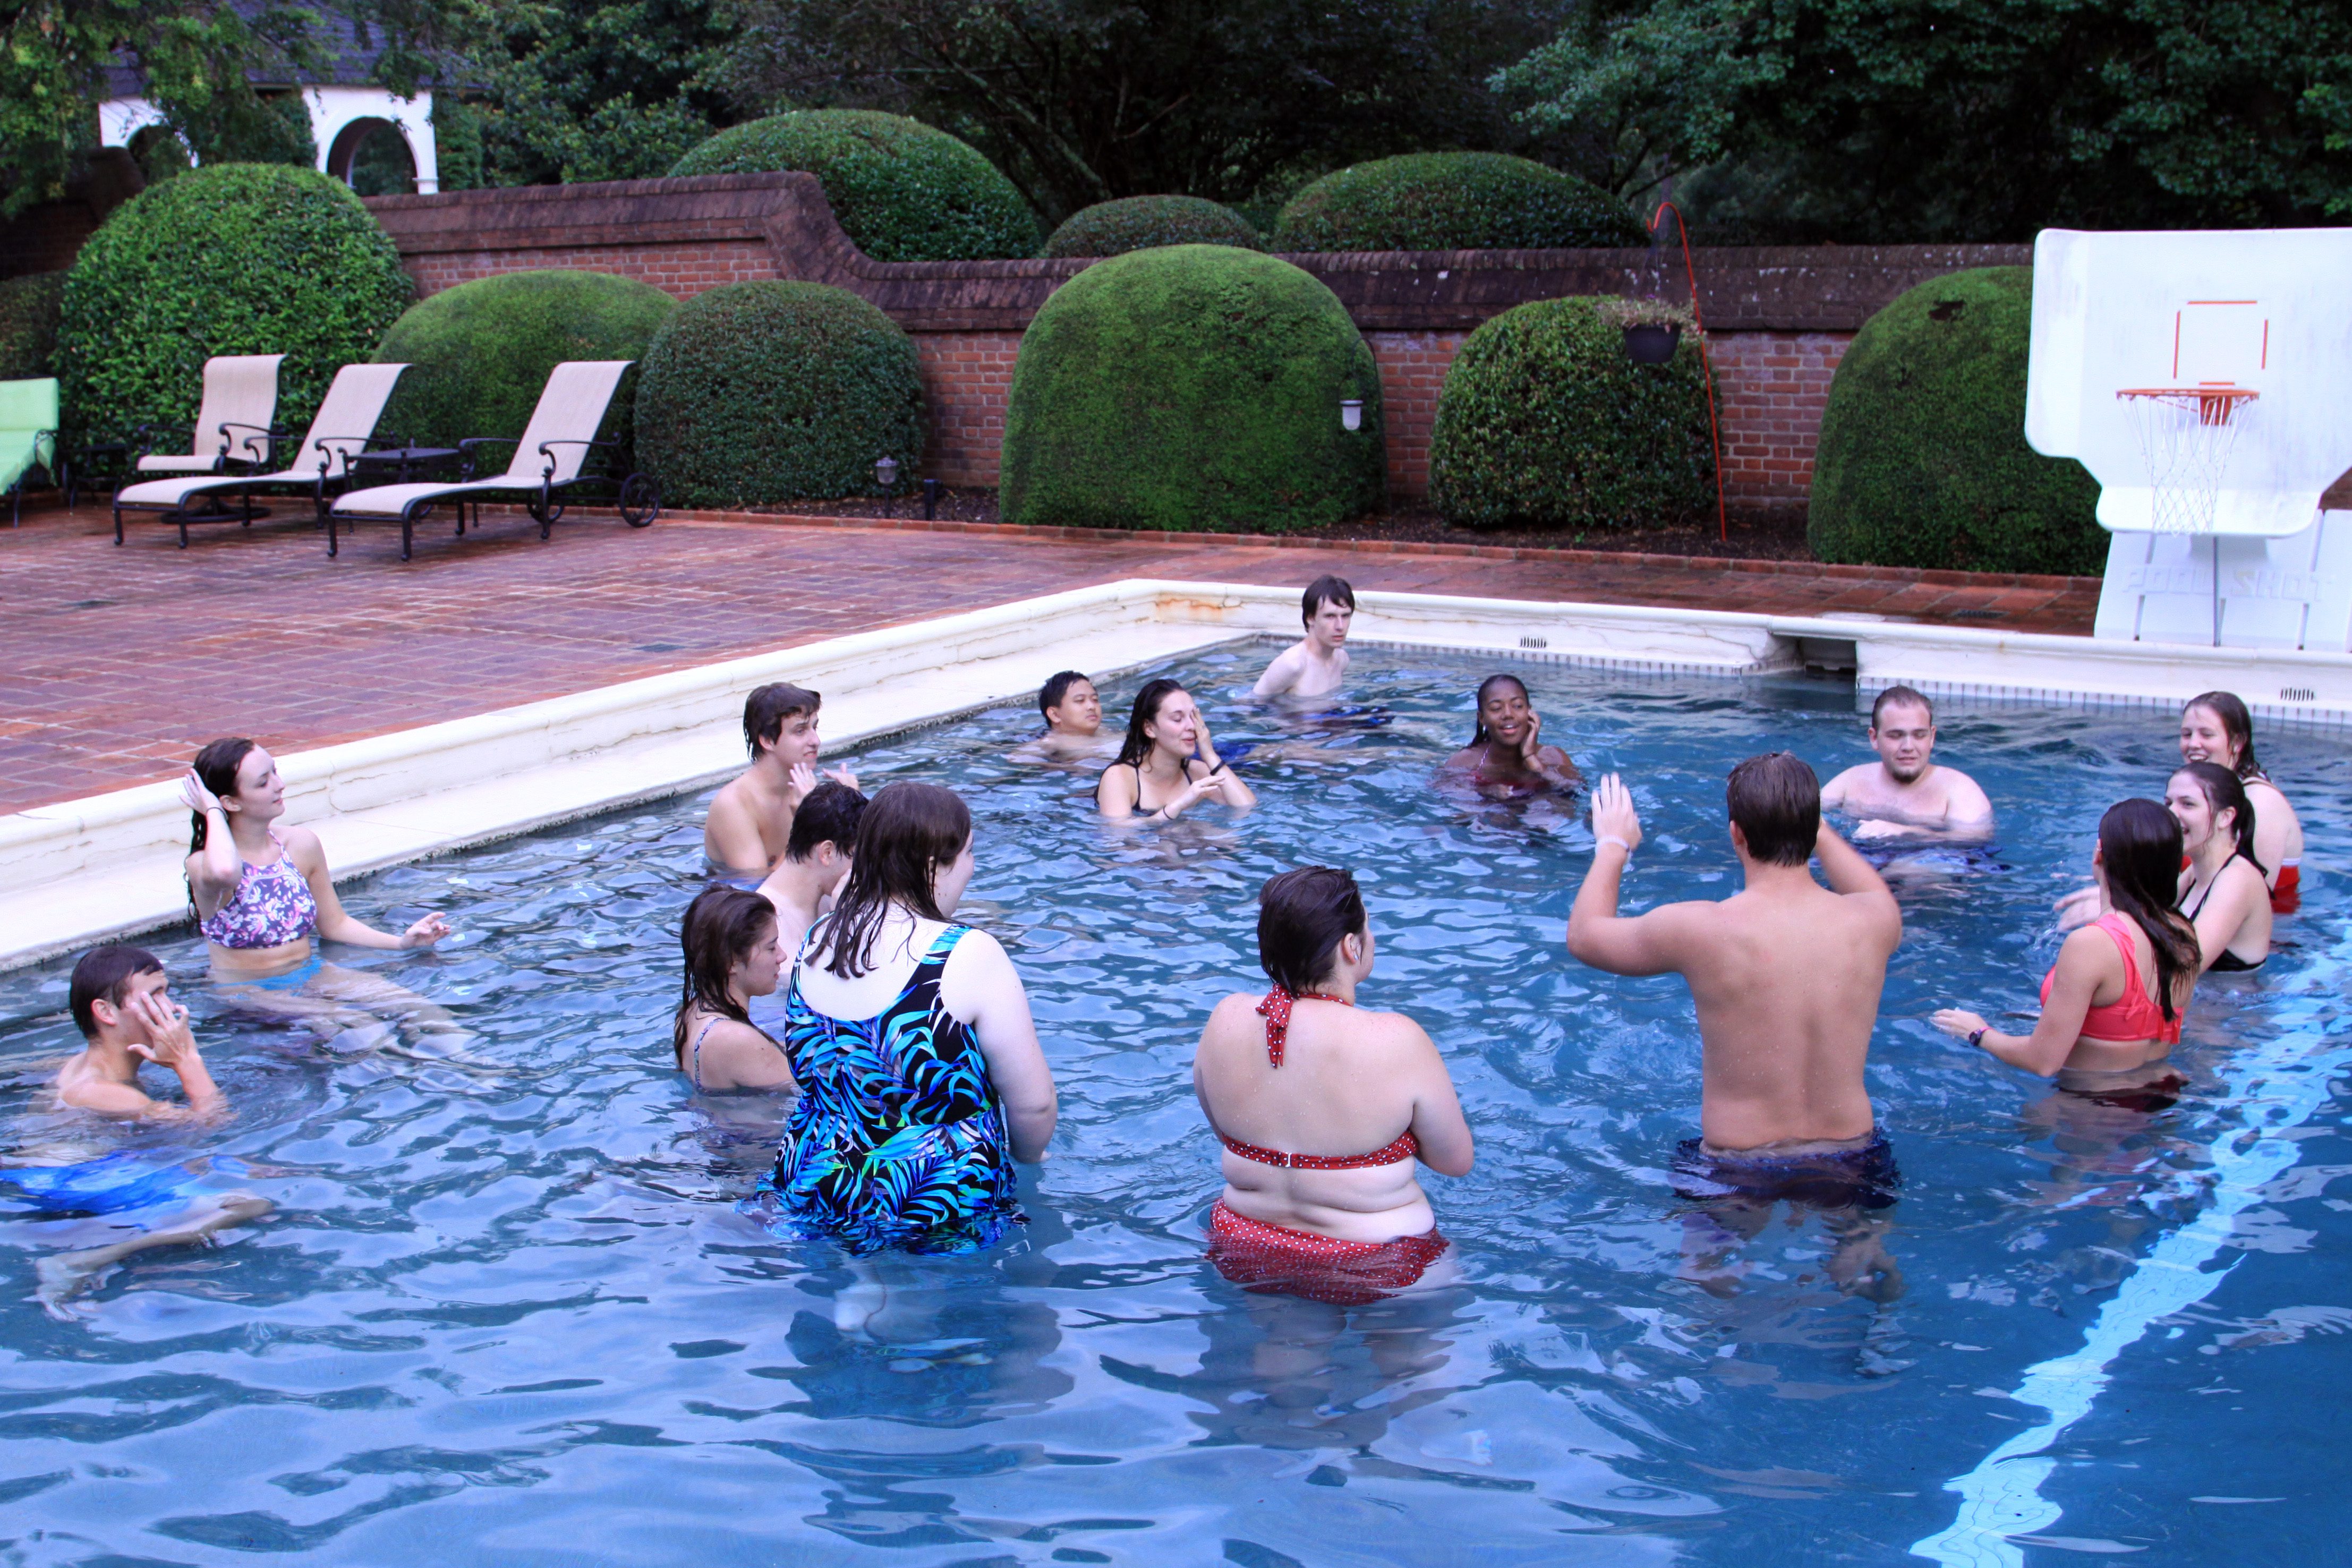 Pool party at President Davis' house!